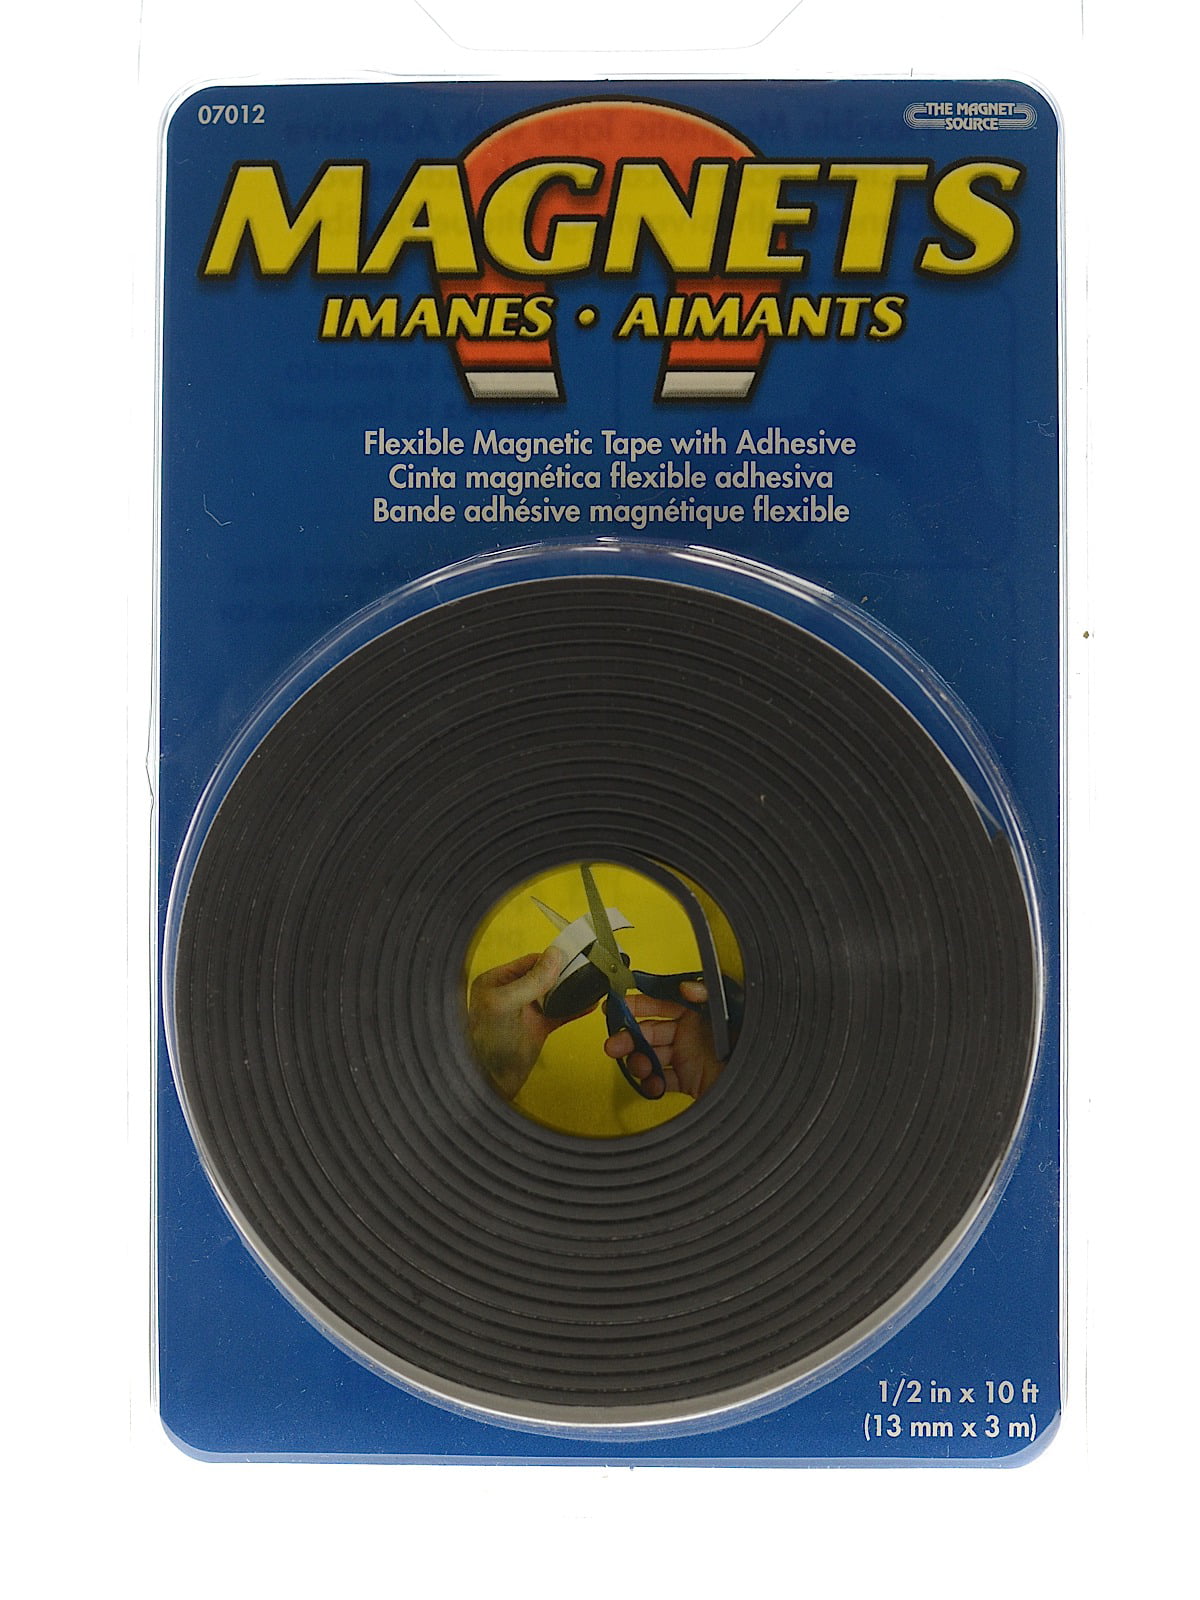 Self Adhesive Rubber Magnetic Tape Magnet  Flexible Rubber Magnetic Strip  - 1m/lot - Aliexpress